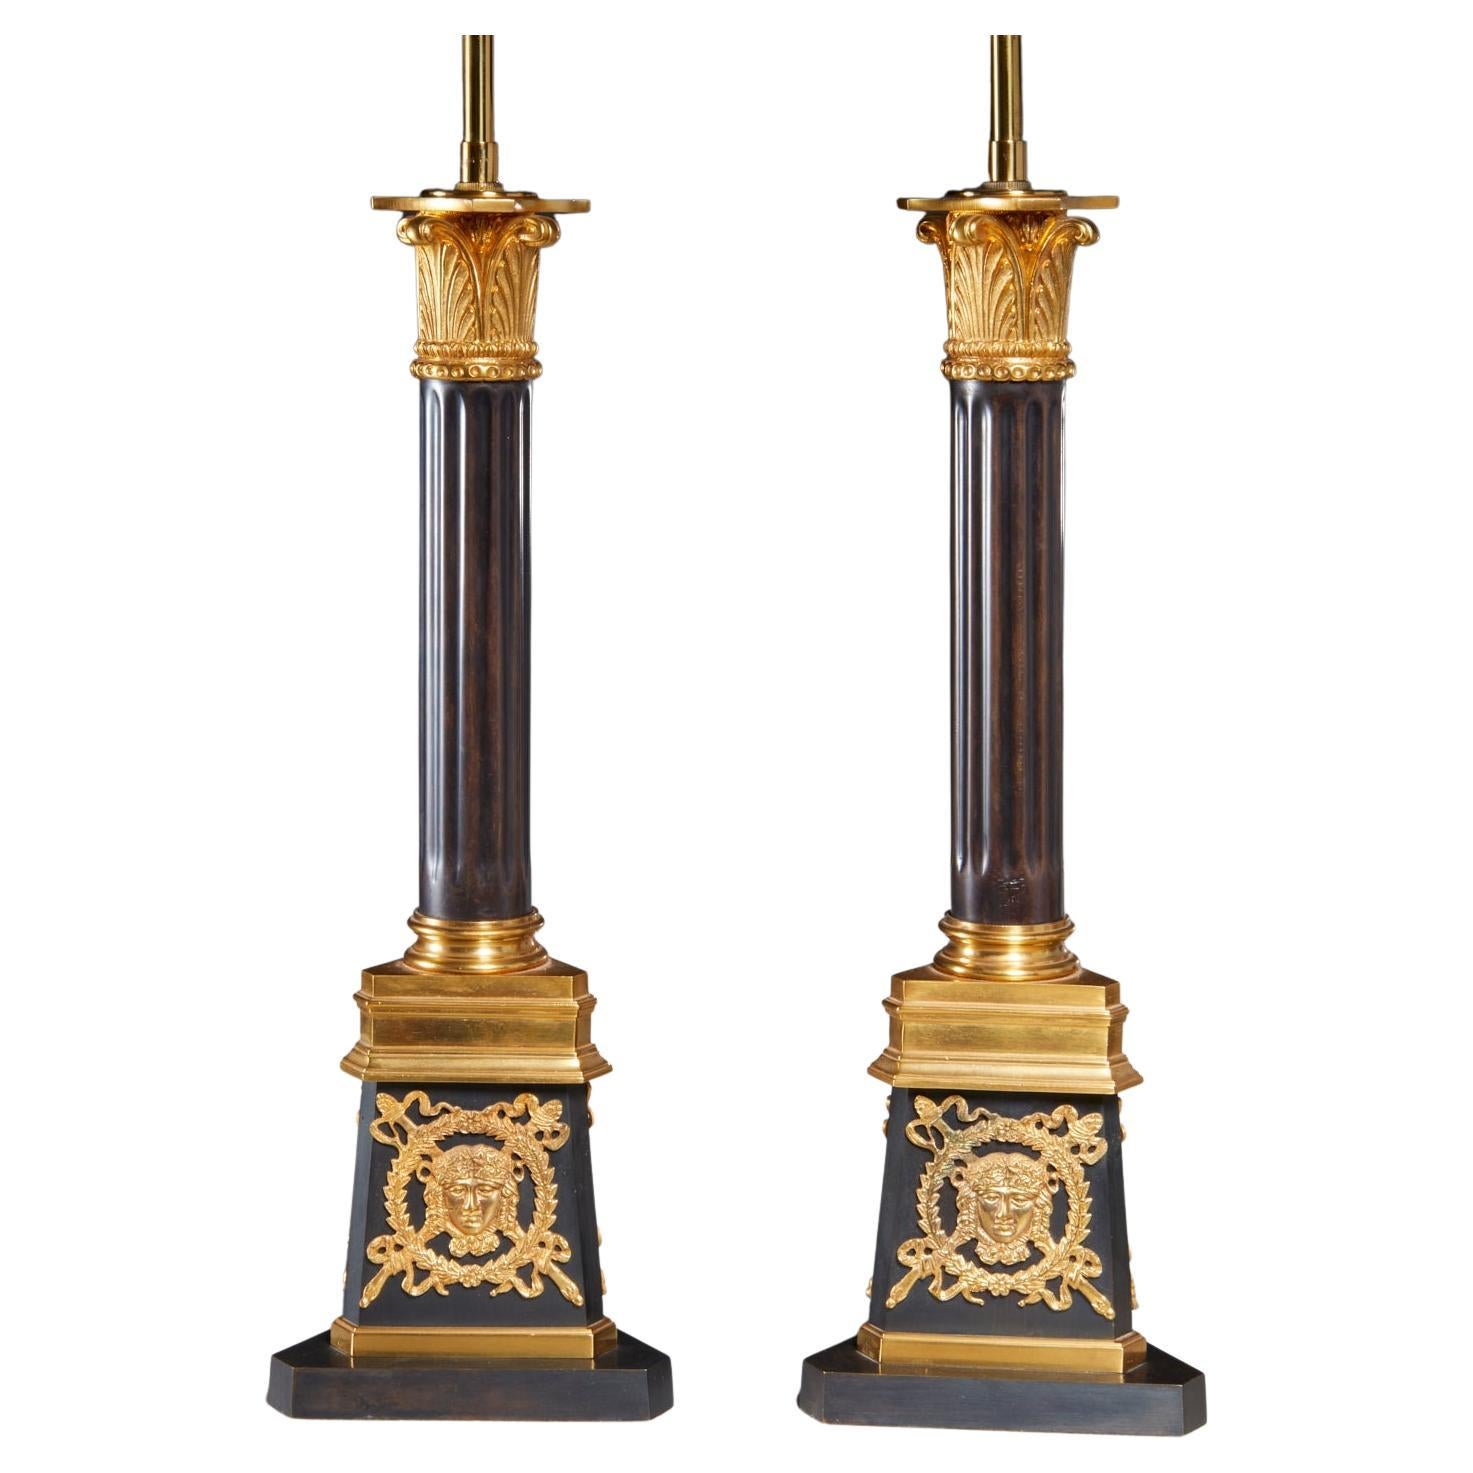 Late 20th c., pair of Italian Louis XVI style gold plated, patinated bronze and gilt bronze column table lamps by Gherardo Degli Albizzi. Of beautiful quality, two light, fluted, columnar body, applied classical decoration to fluted capital with